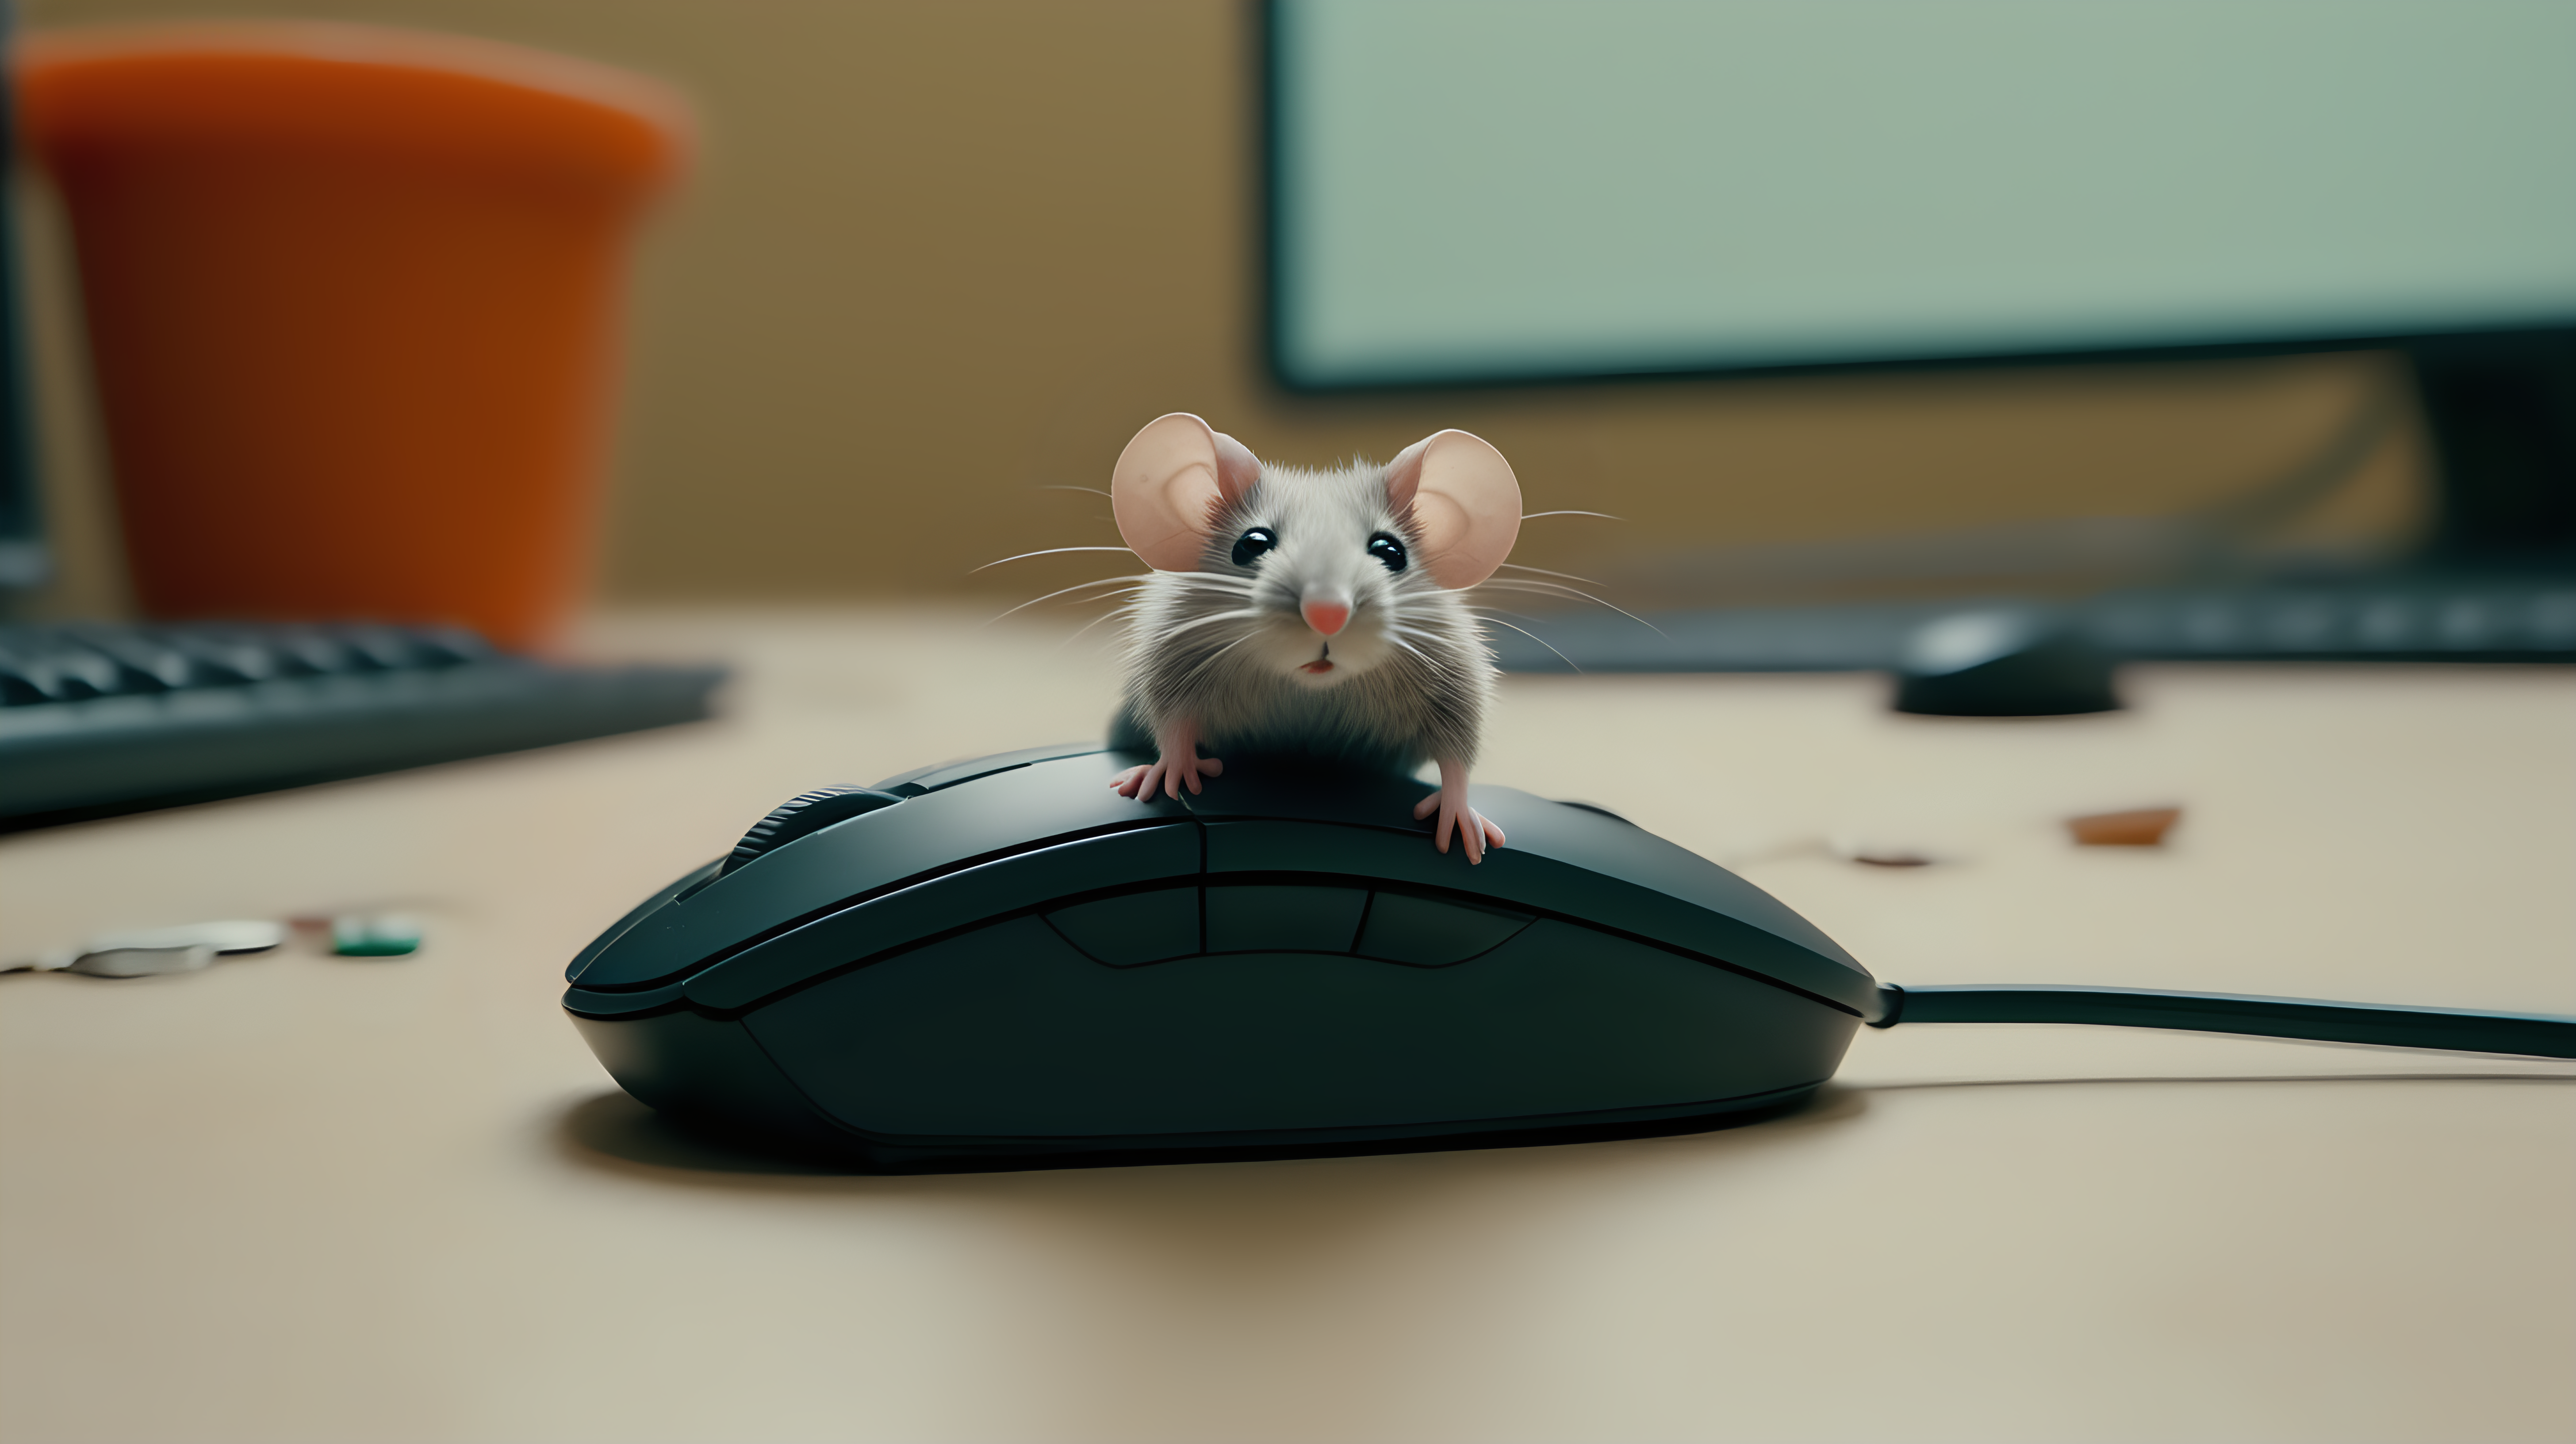 a small cute fuzzy toy mouse sits on